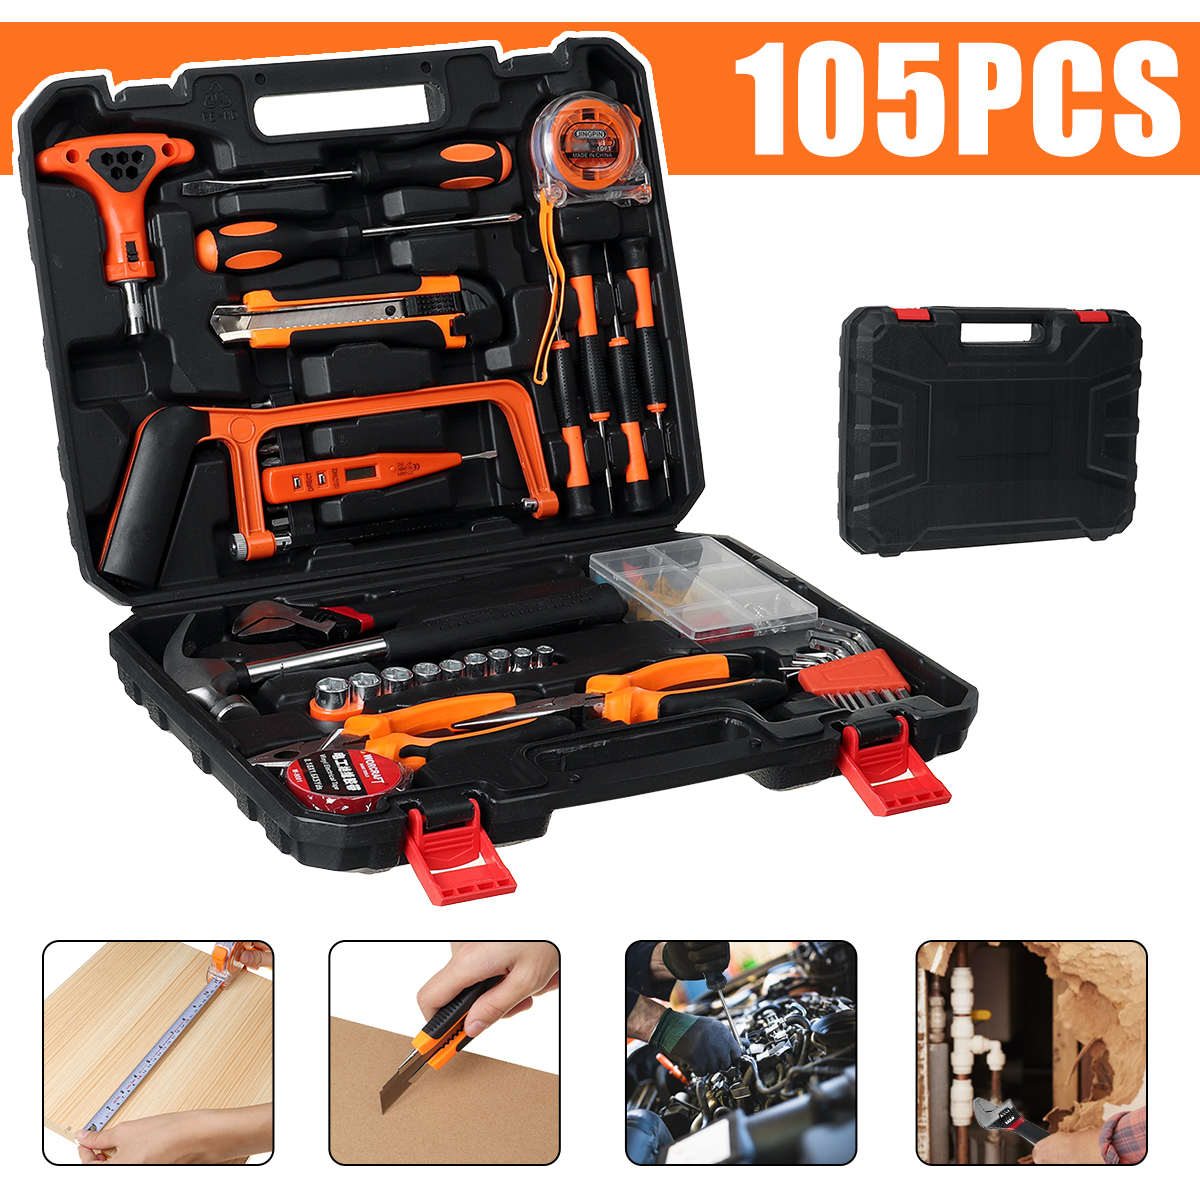 105Pcs-Hardware-Tools-Kit-Screwdriver-Wrench-w-Storage-Box-Applied-To-Home-Outdoors-Car-1708391-2